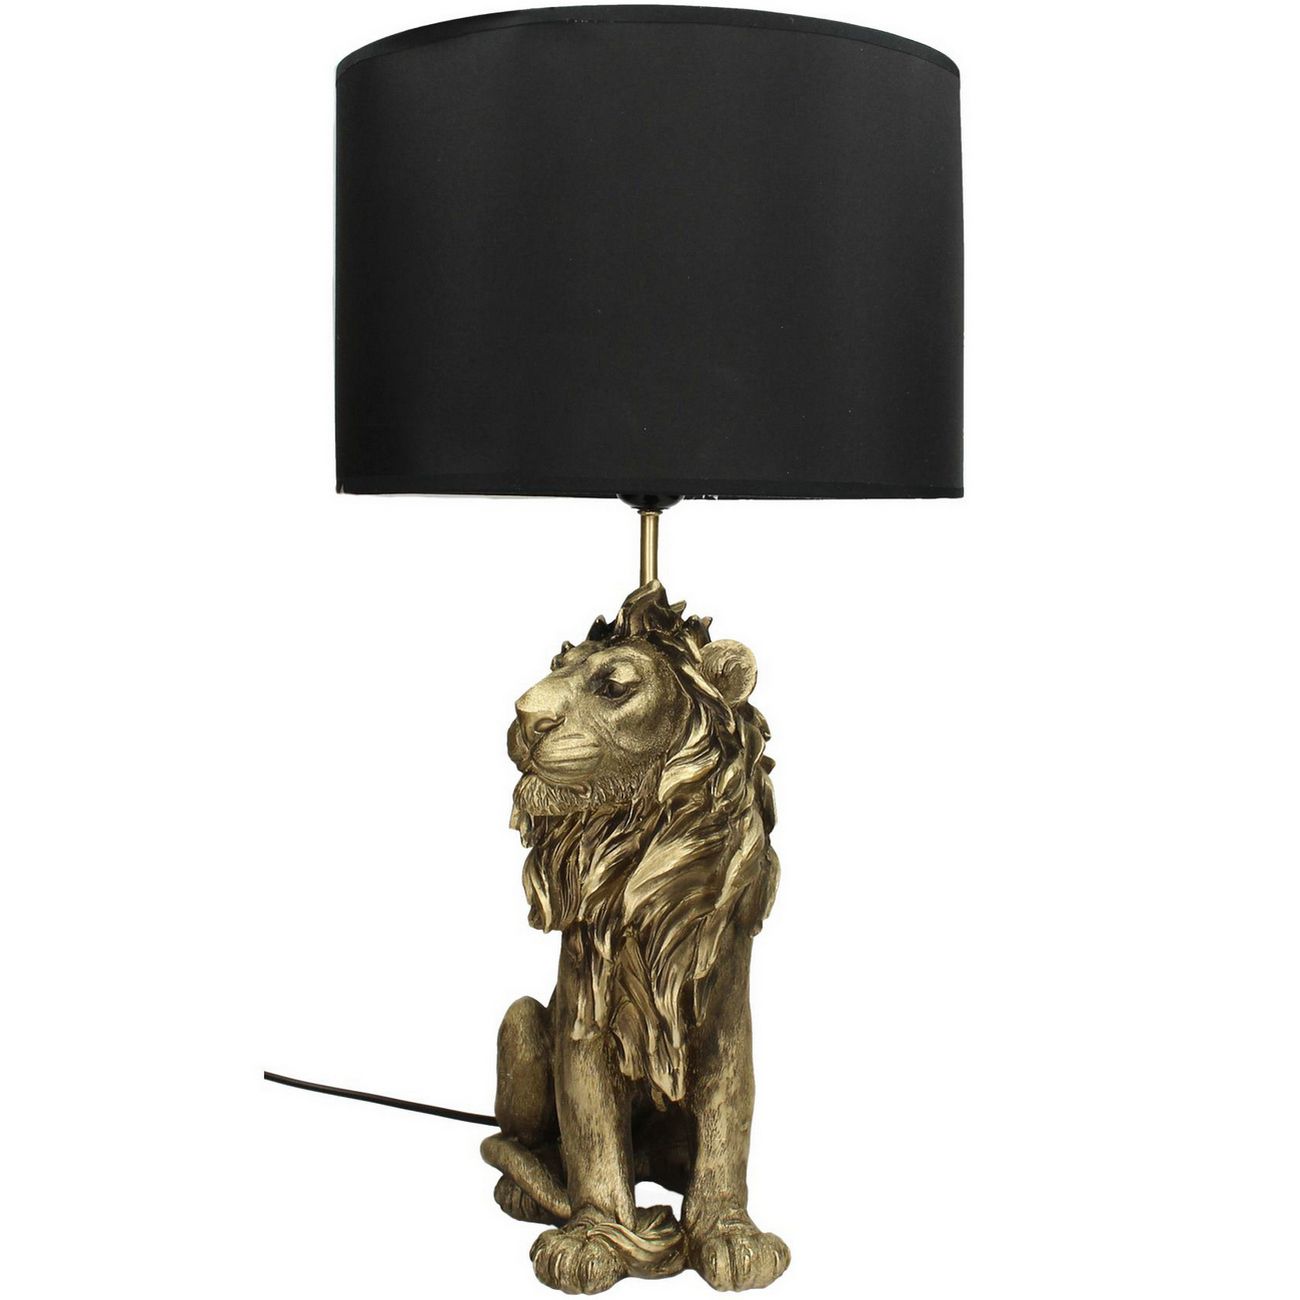 Gold Lion Table Lamp With Black Shade, Lion Table Lamp